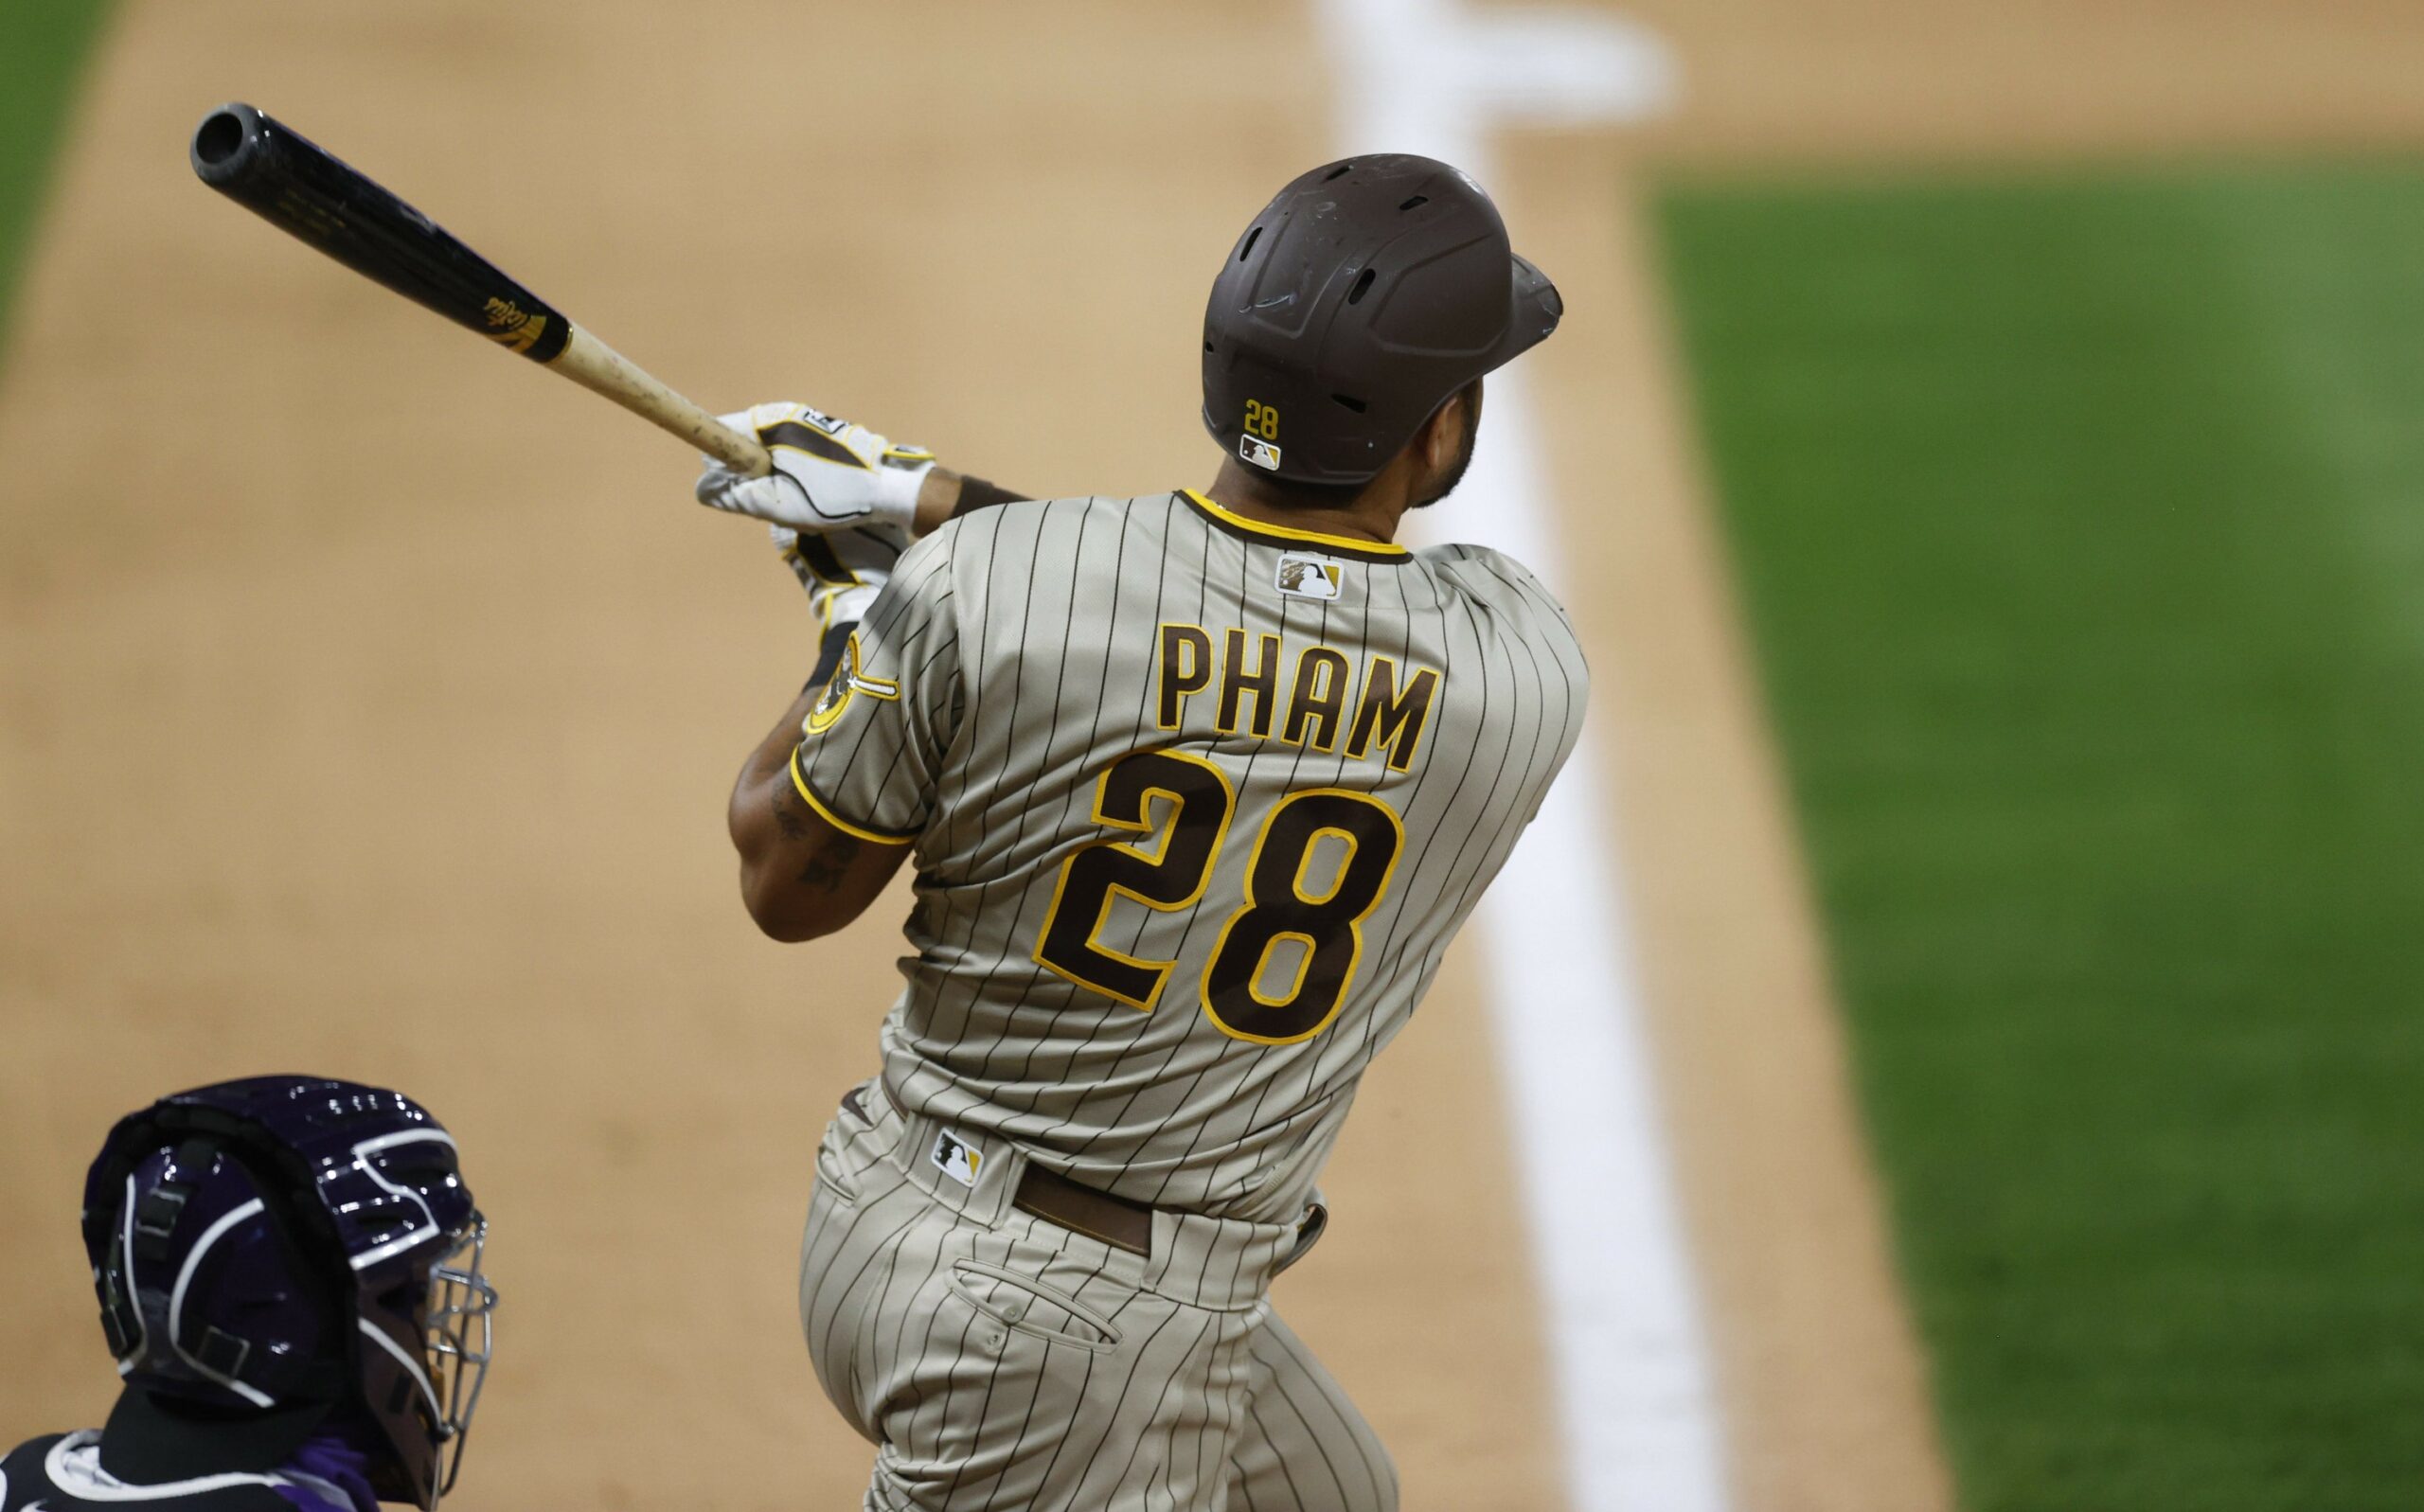 Rays expected to trade Tommy Pham, acquire Hunter Renfroe from San Diego  Padres